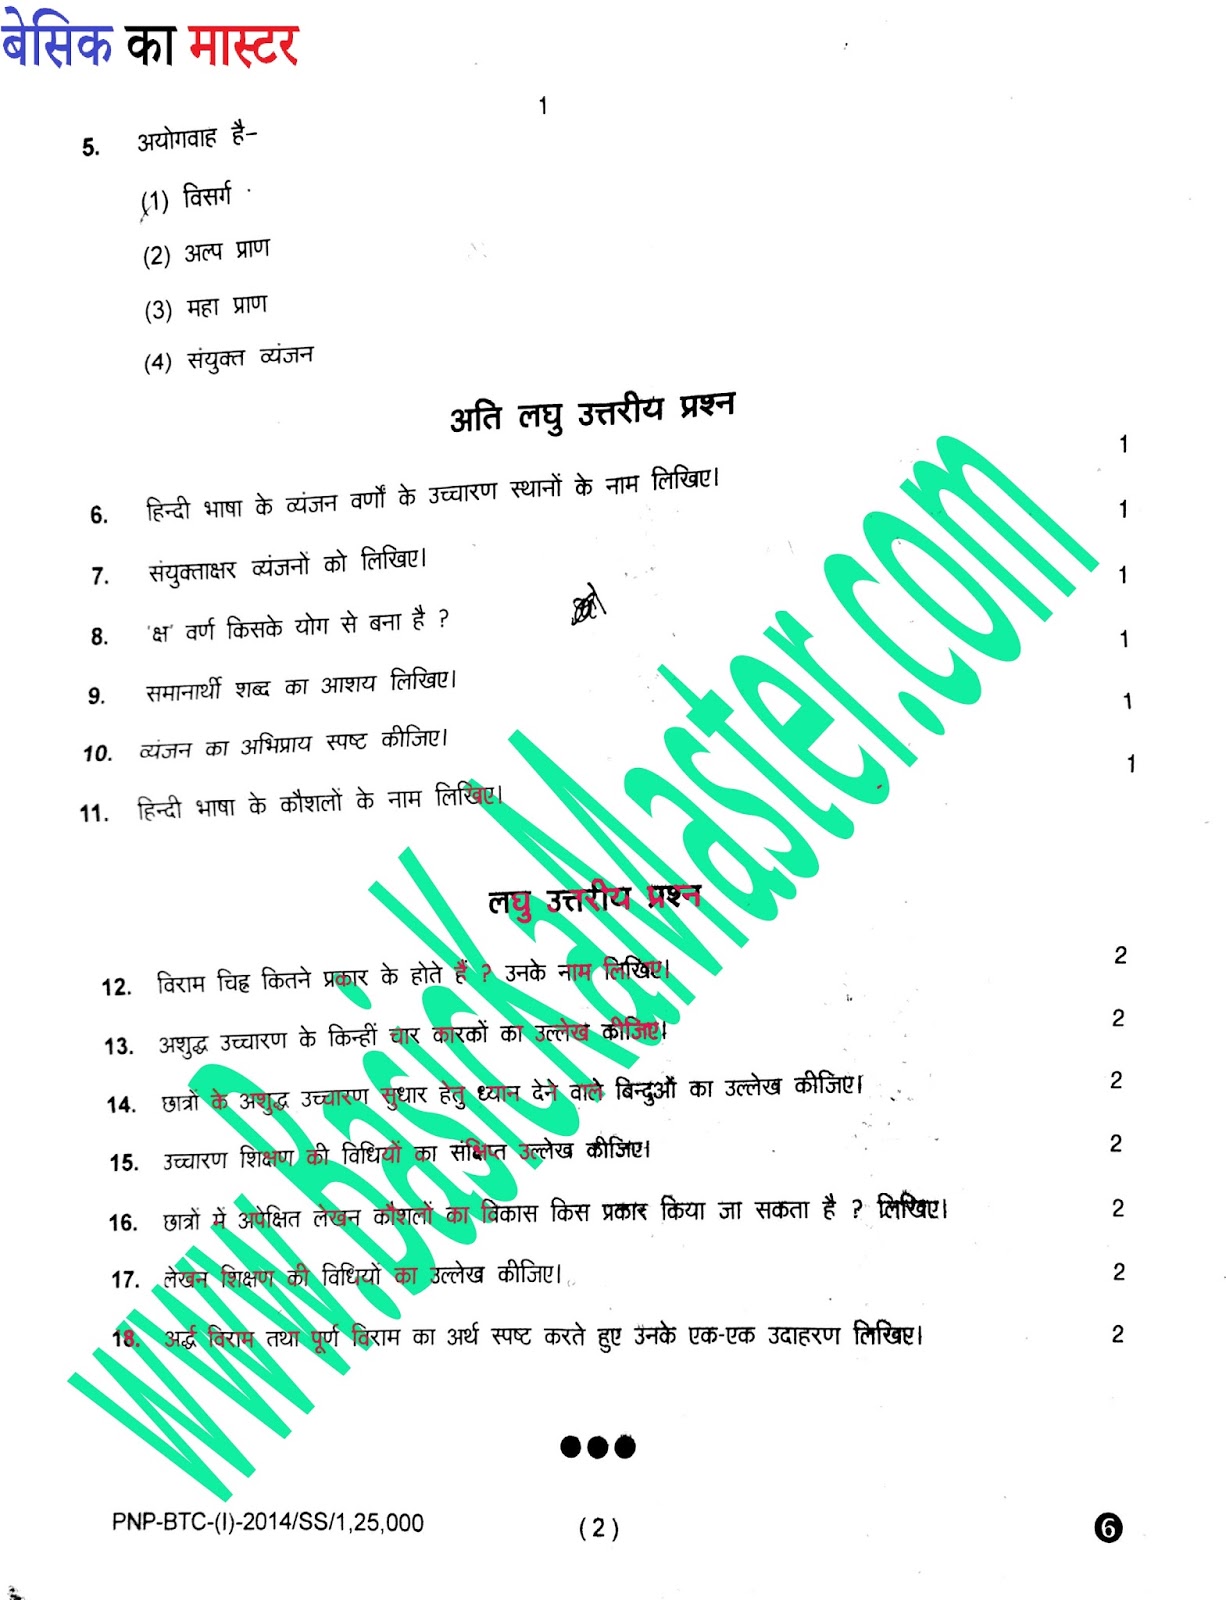 Btc question paper in hindi pdf cds recovery rate investopedia forex